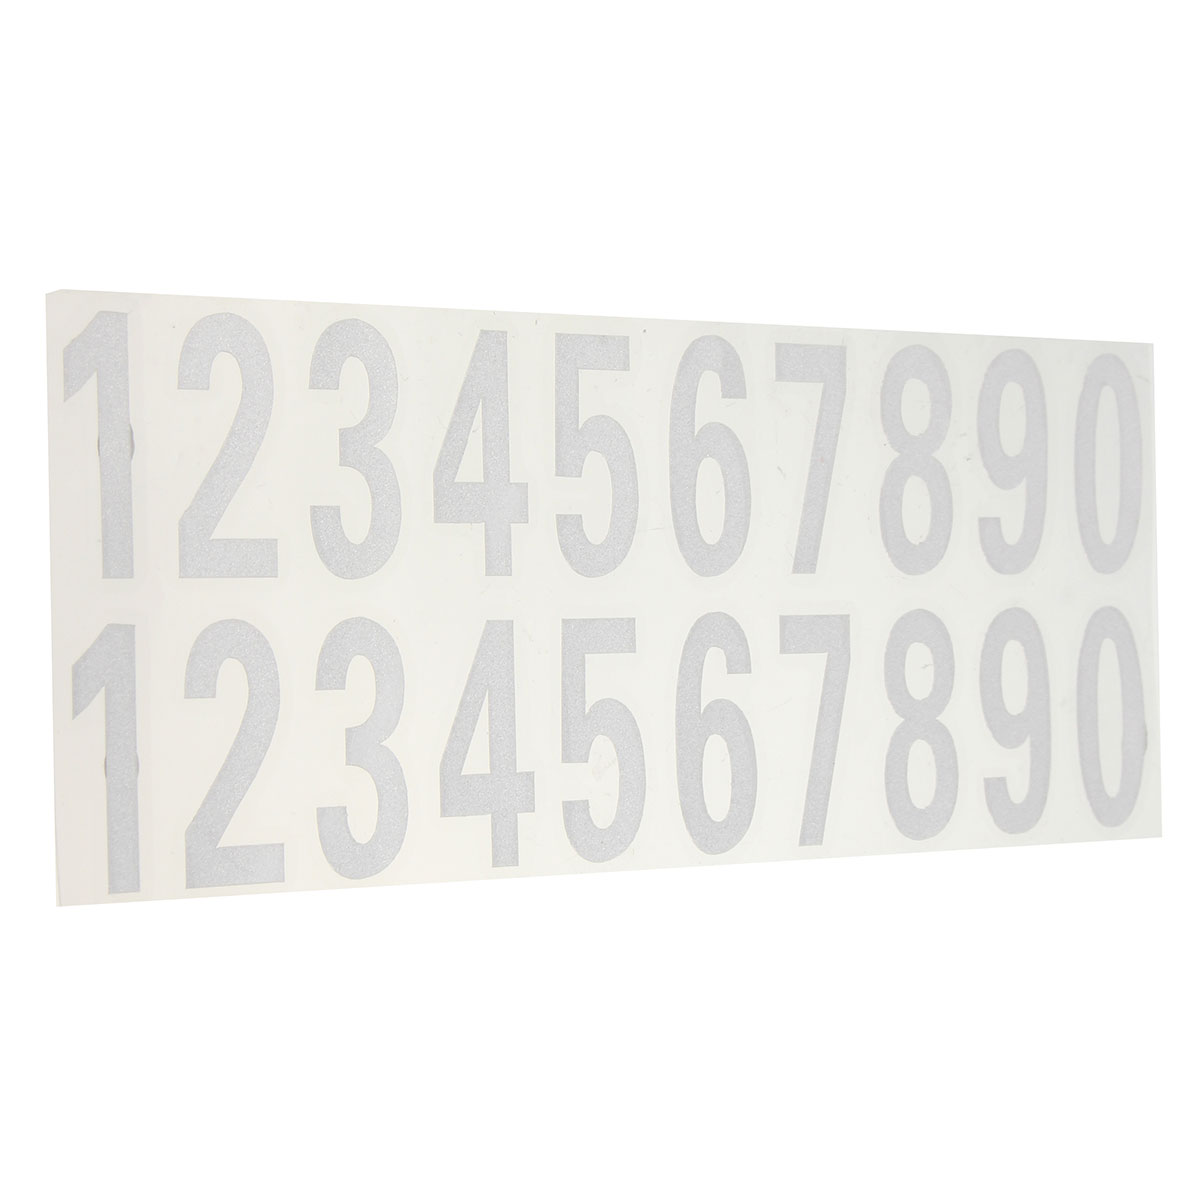 Number-Reflective-Sticker-Car-Vinyl-Decal-Street-Address-Mail-Box-Number-Stickers-White-Black-1088688